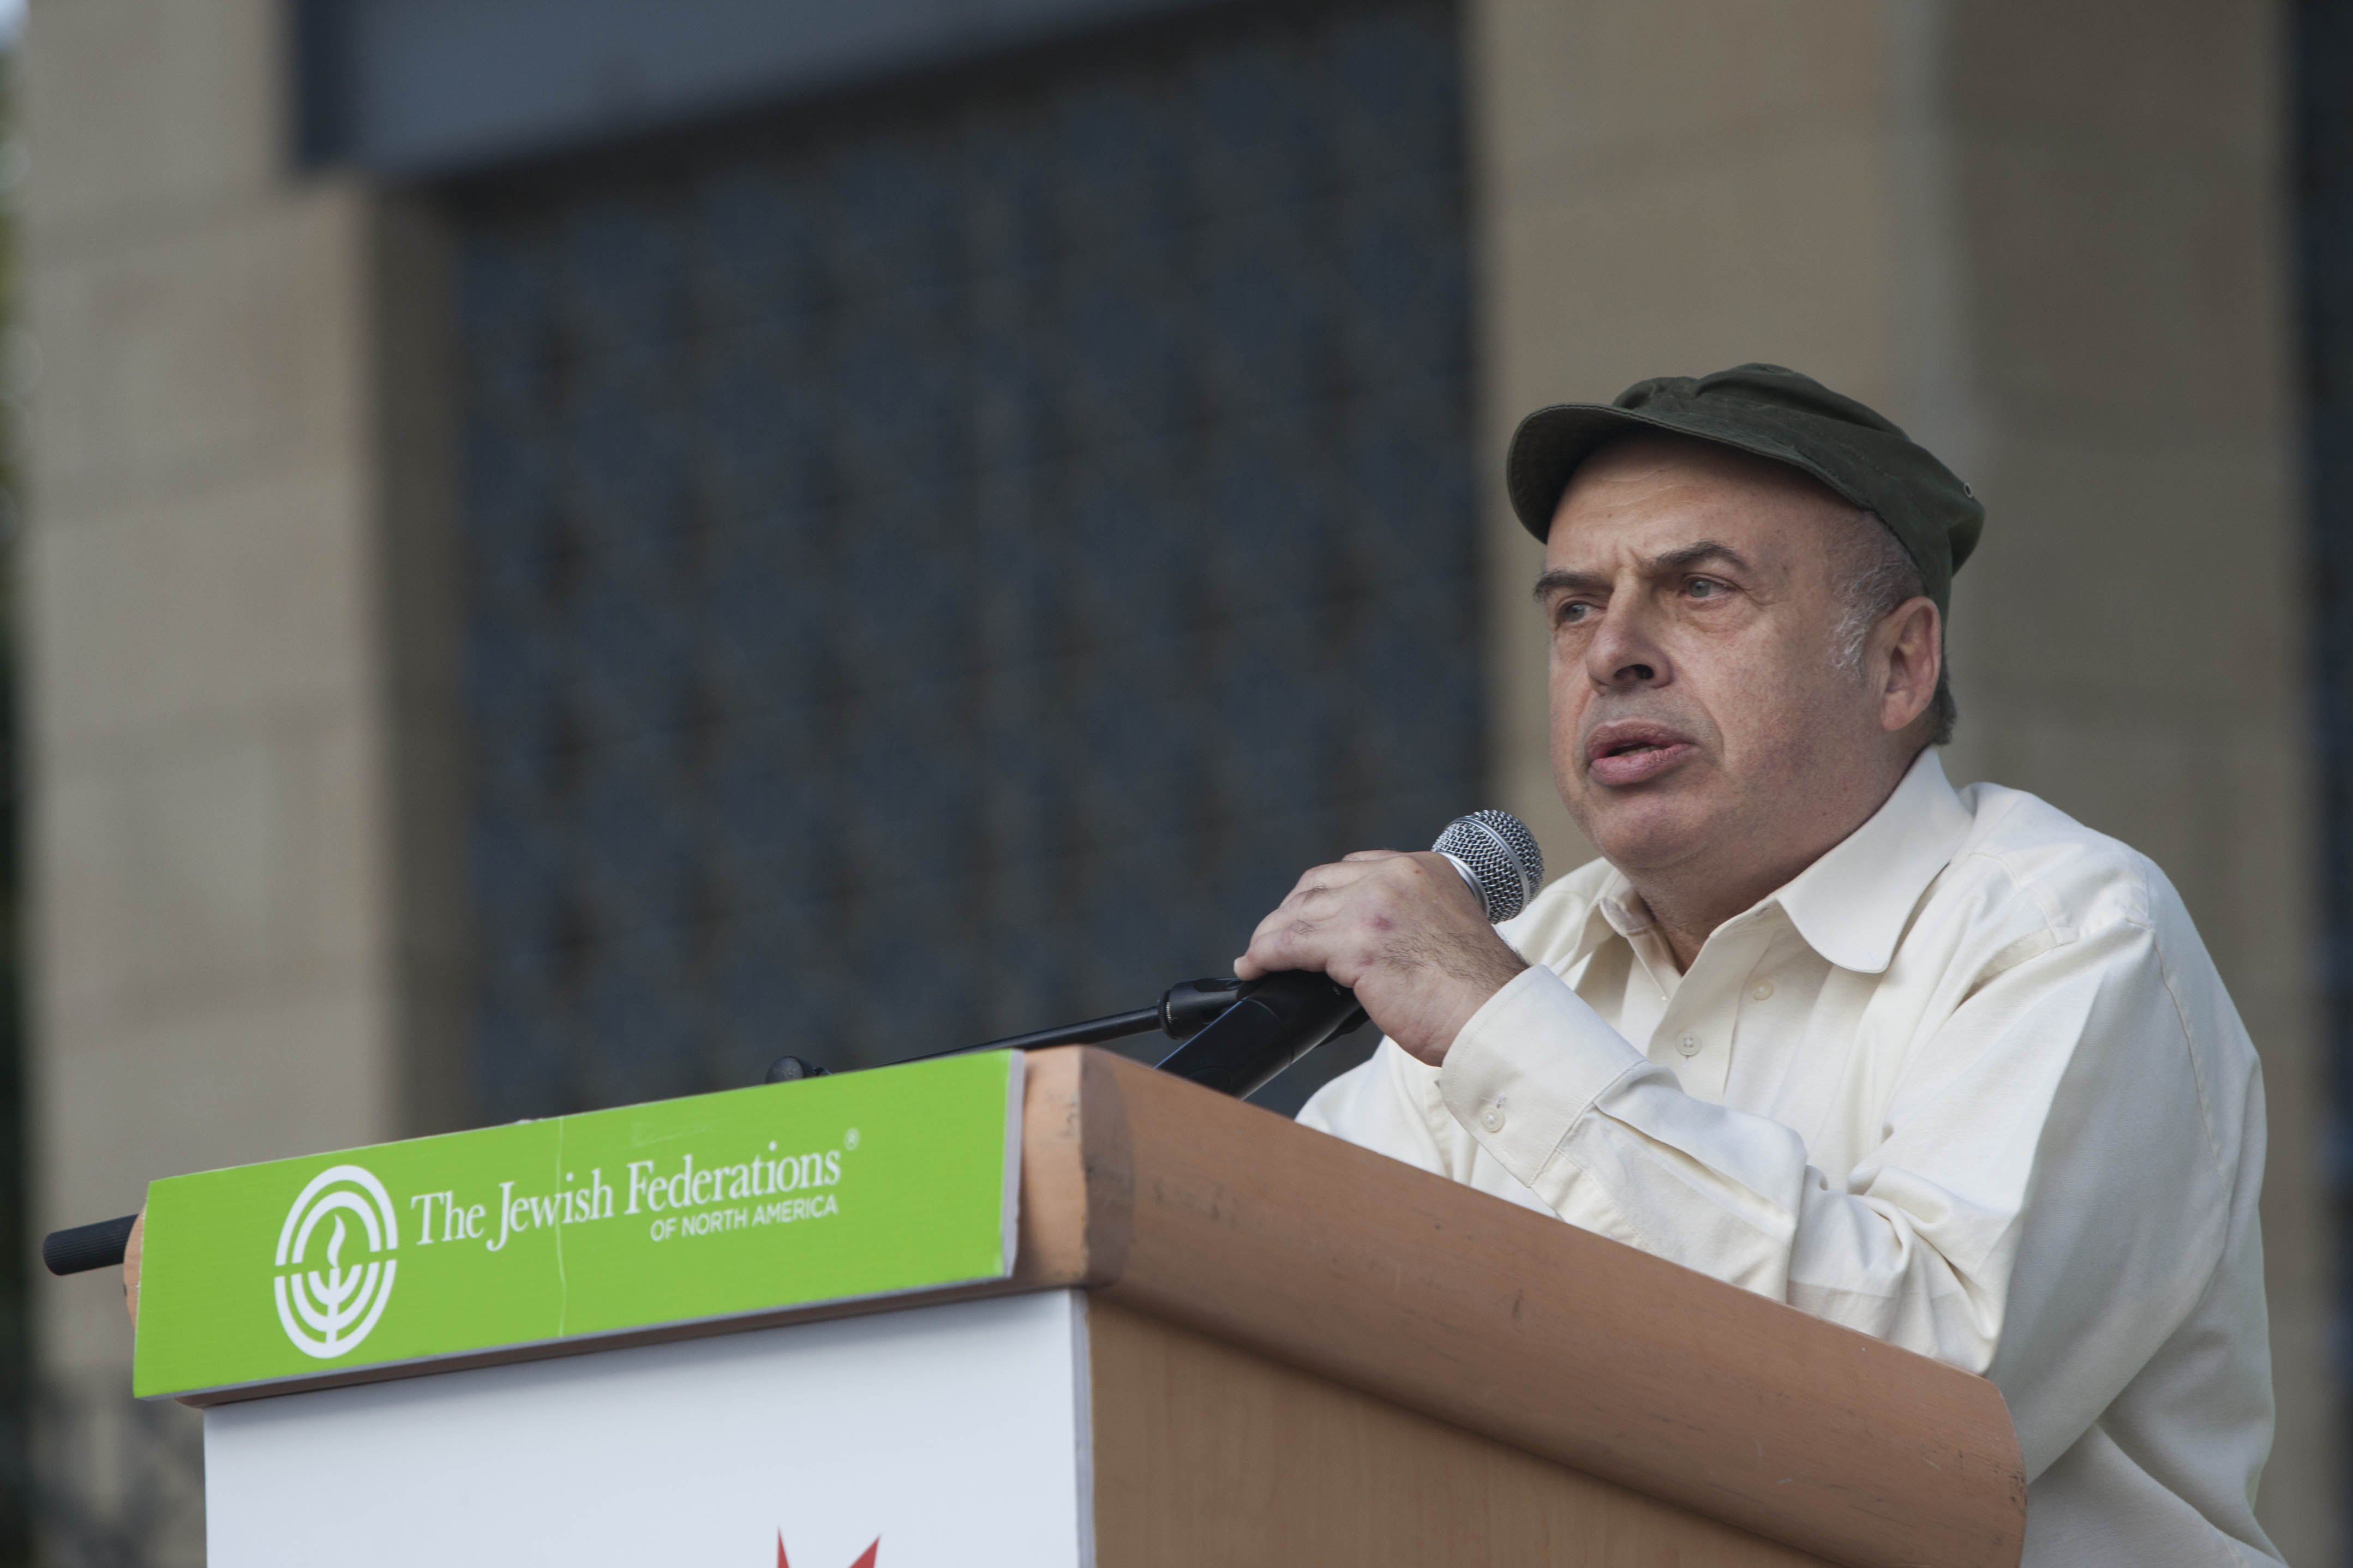 Identifying the disease, but missing a key part of the cause. Natan Sharansky. Photo: Yonatan Sidnel/Flash90